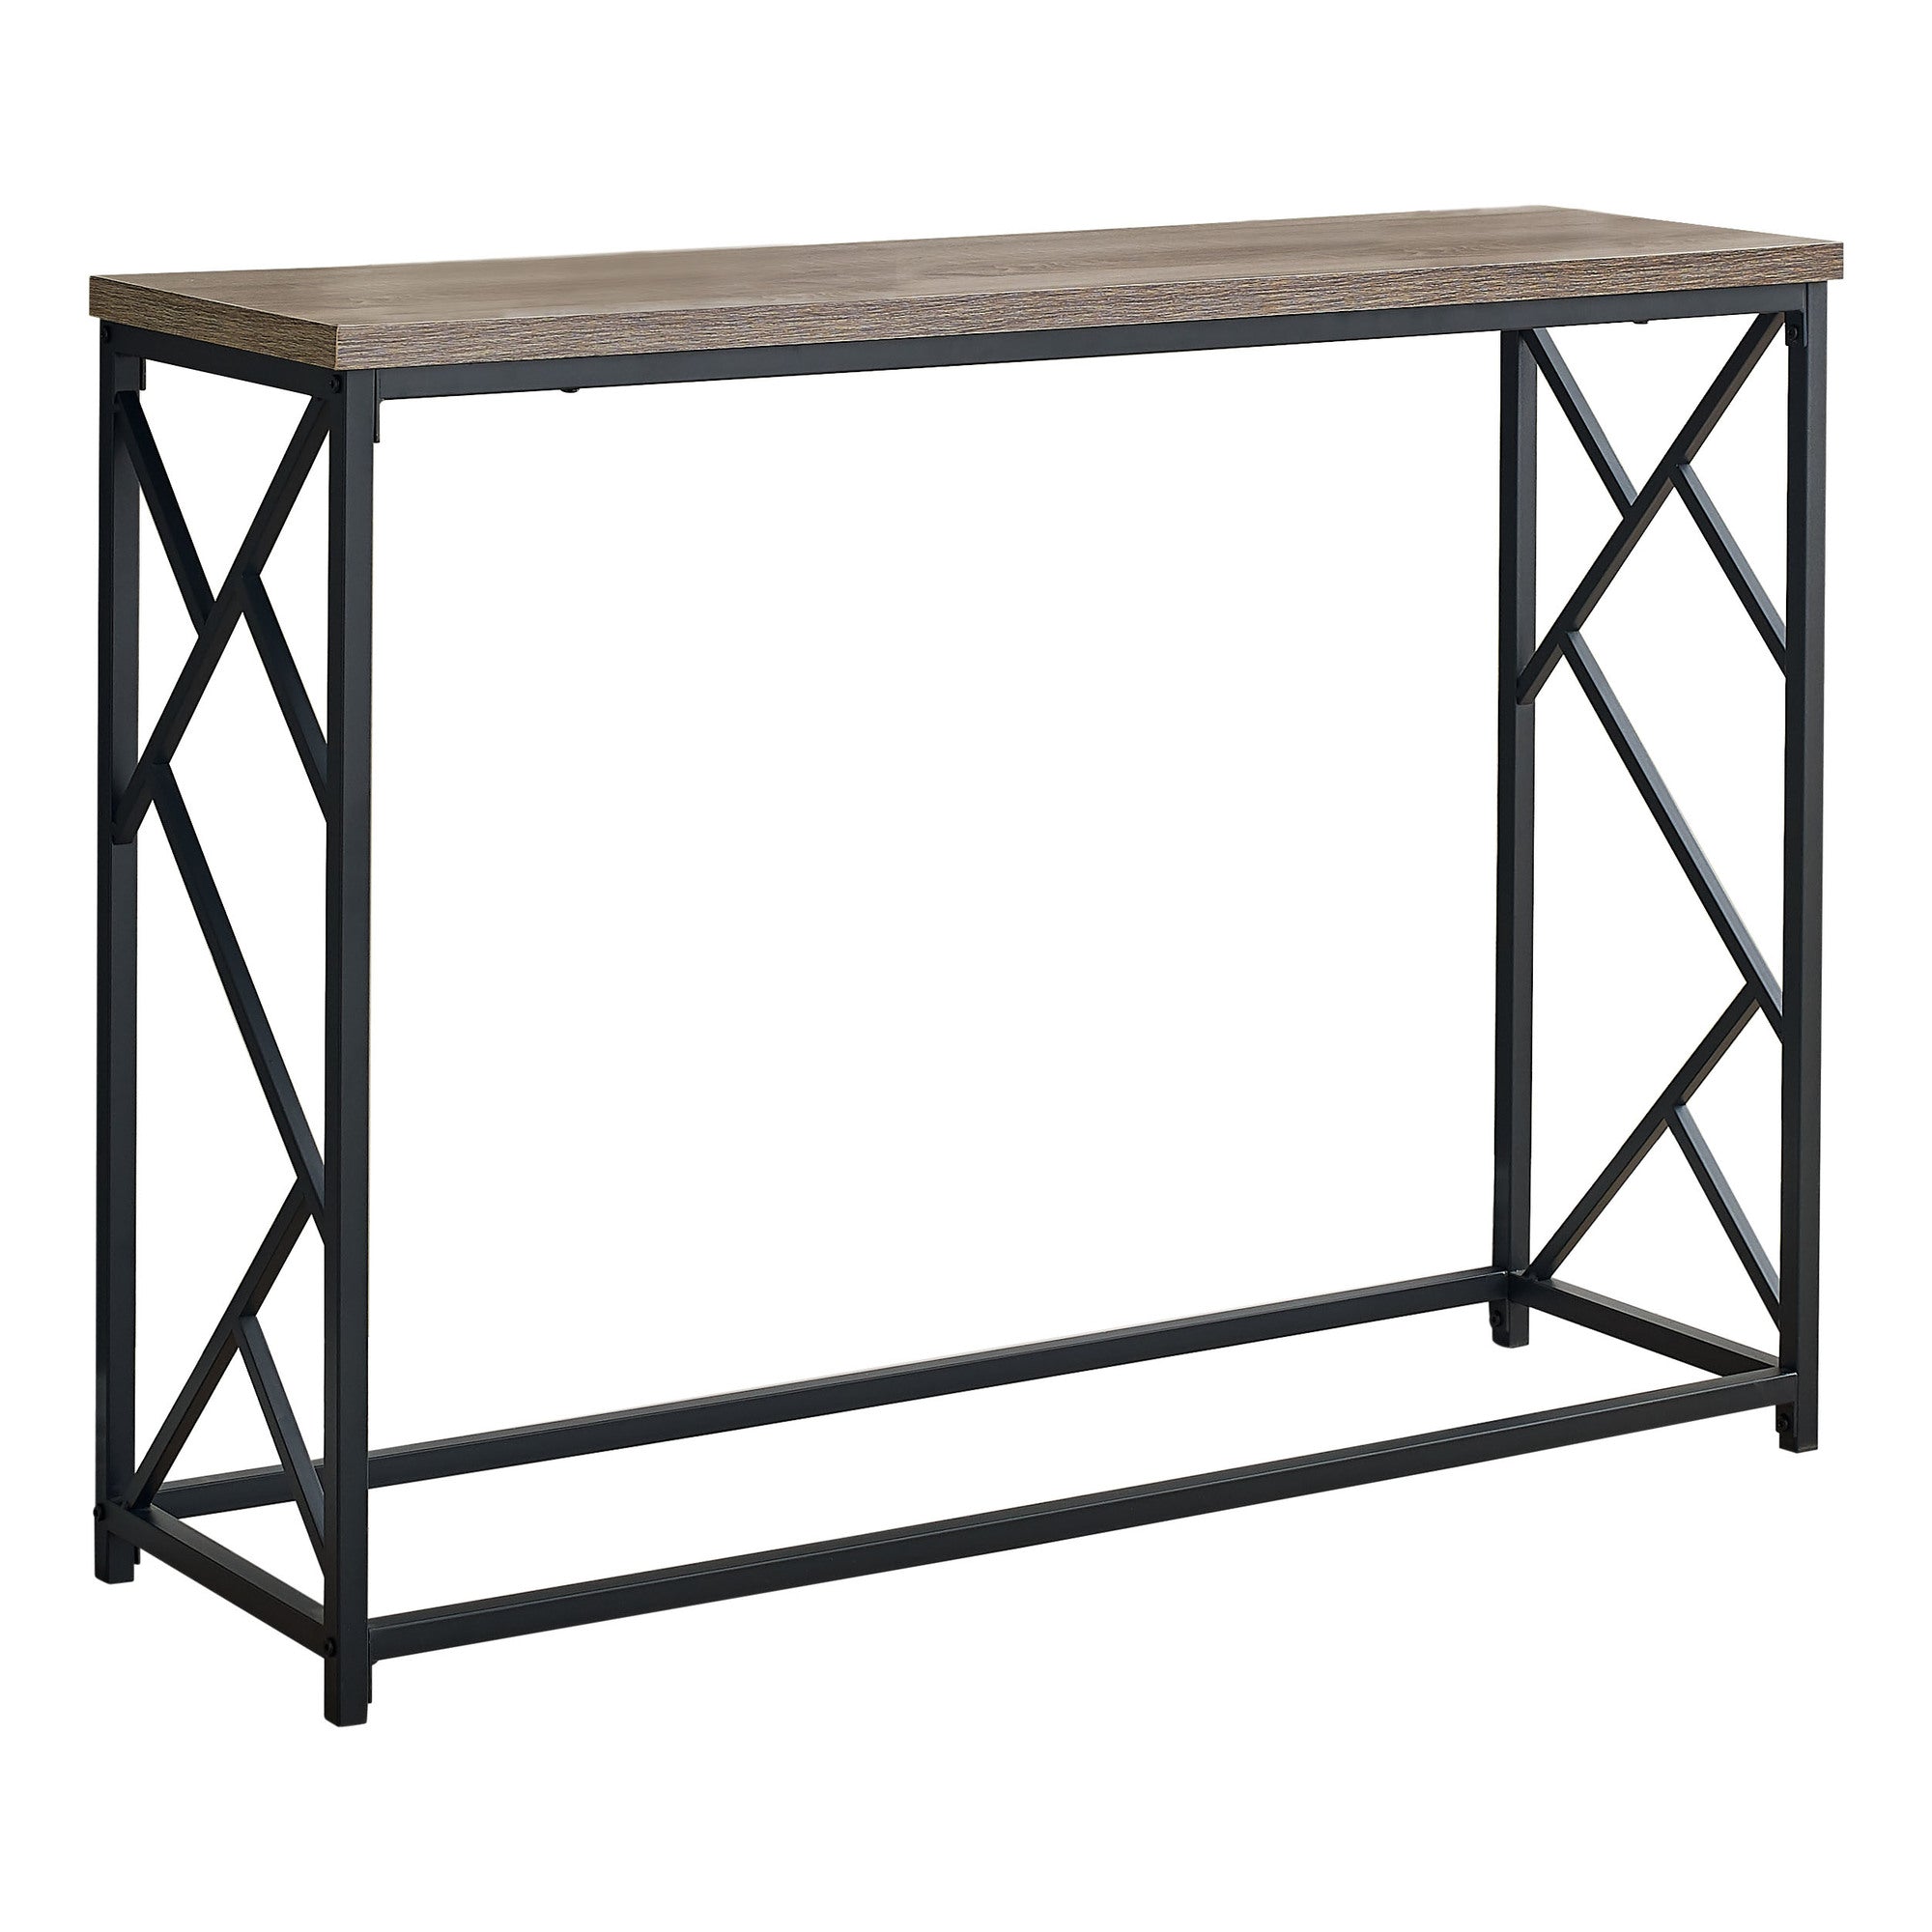 44" Taupe And Black Frame Console Table